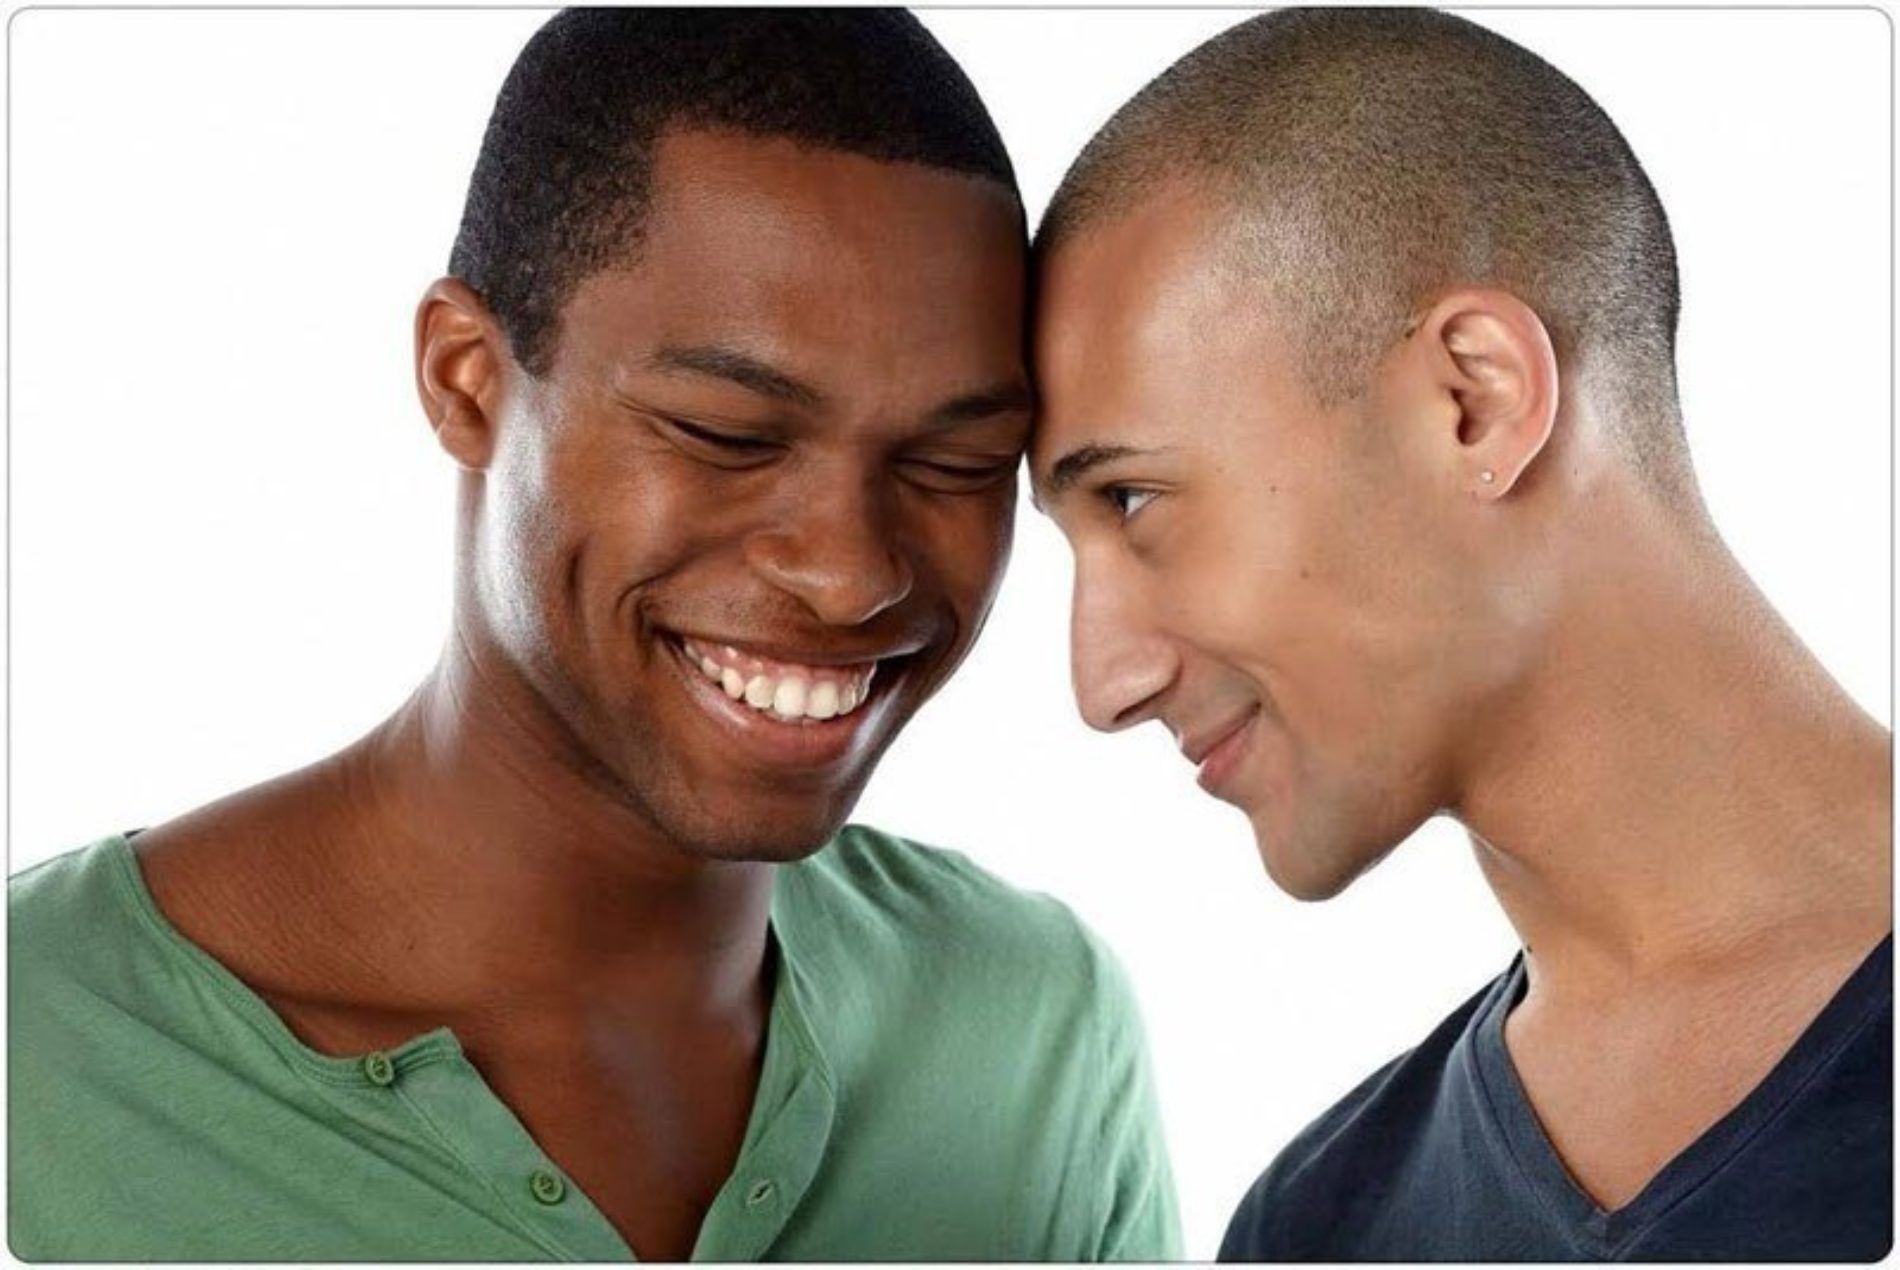 Here’s What Happened When A Straight Guy Accepted A Date With A Gay Man